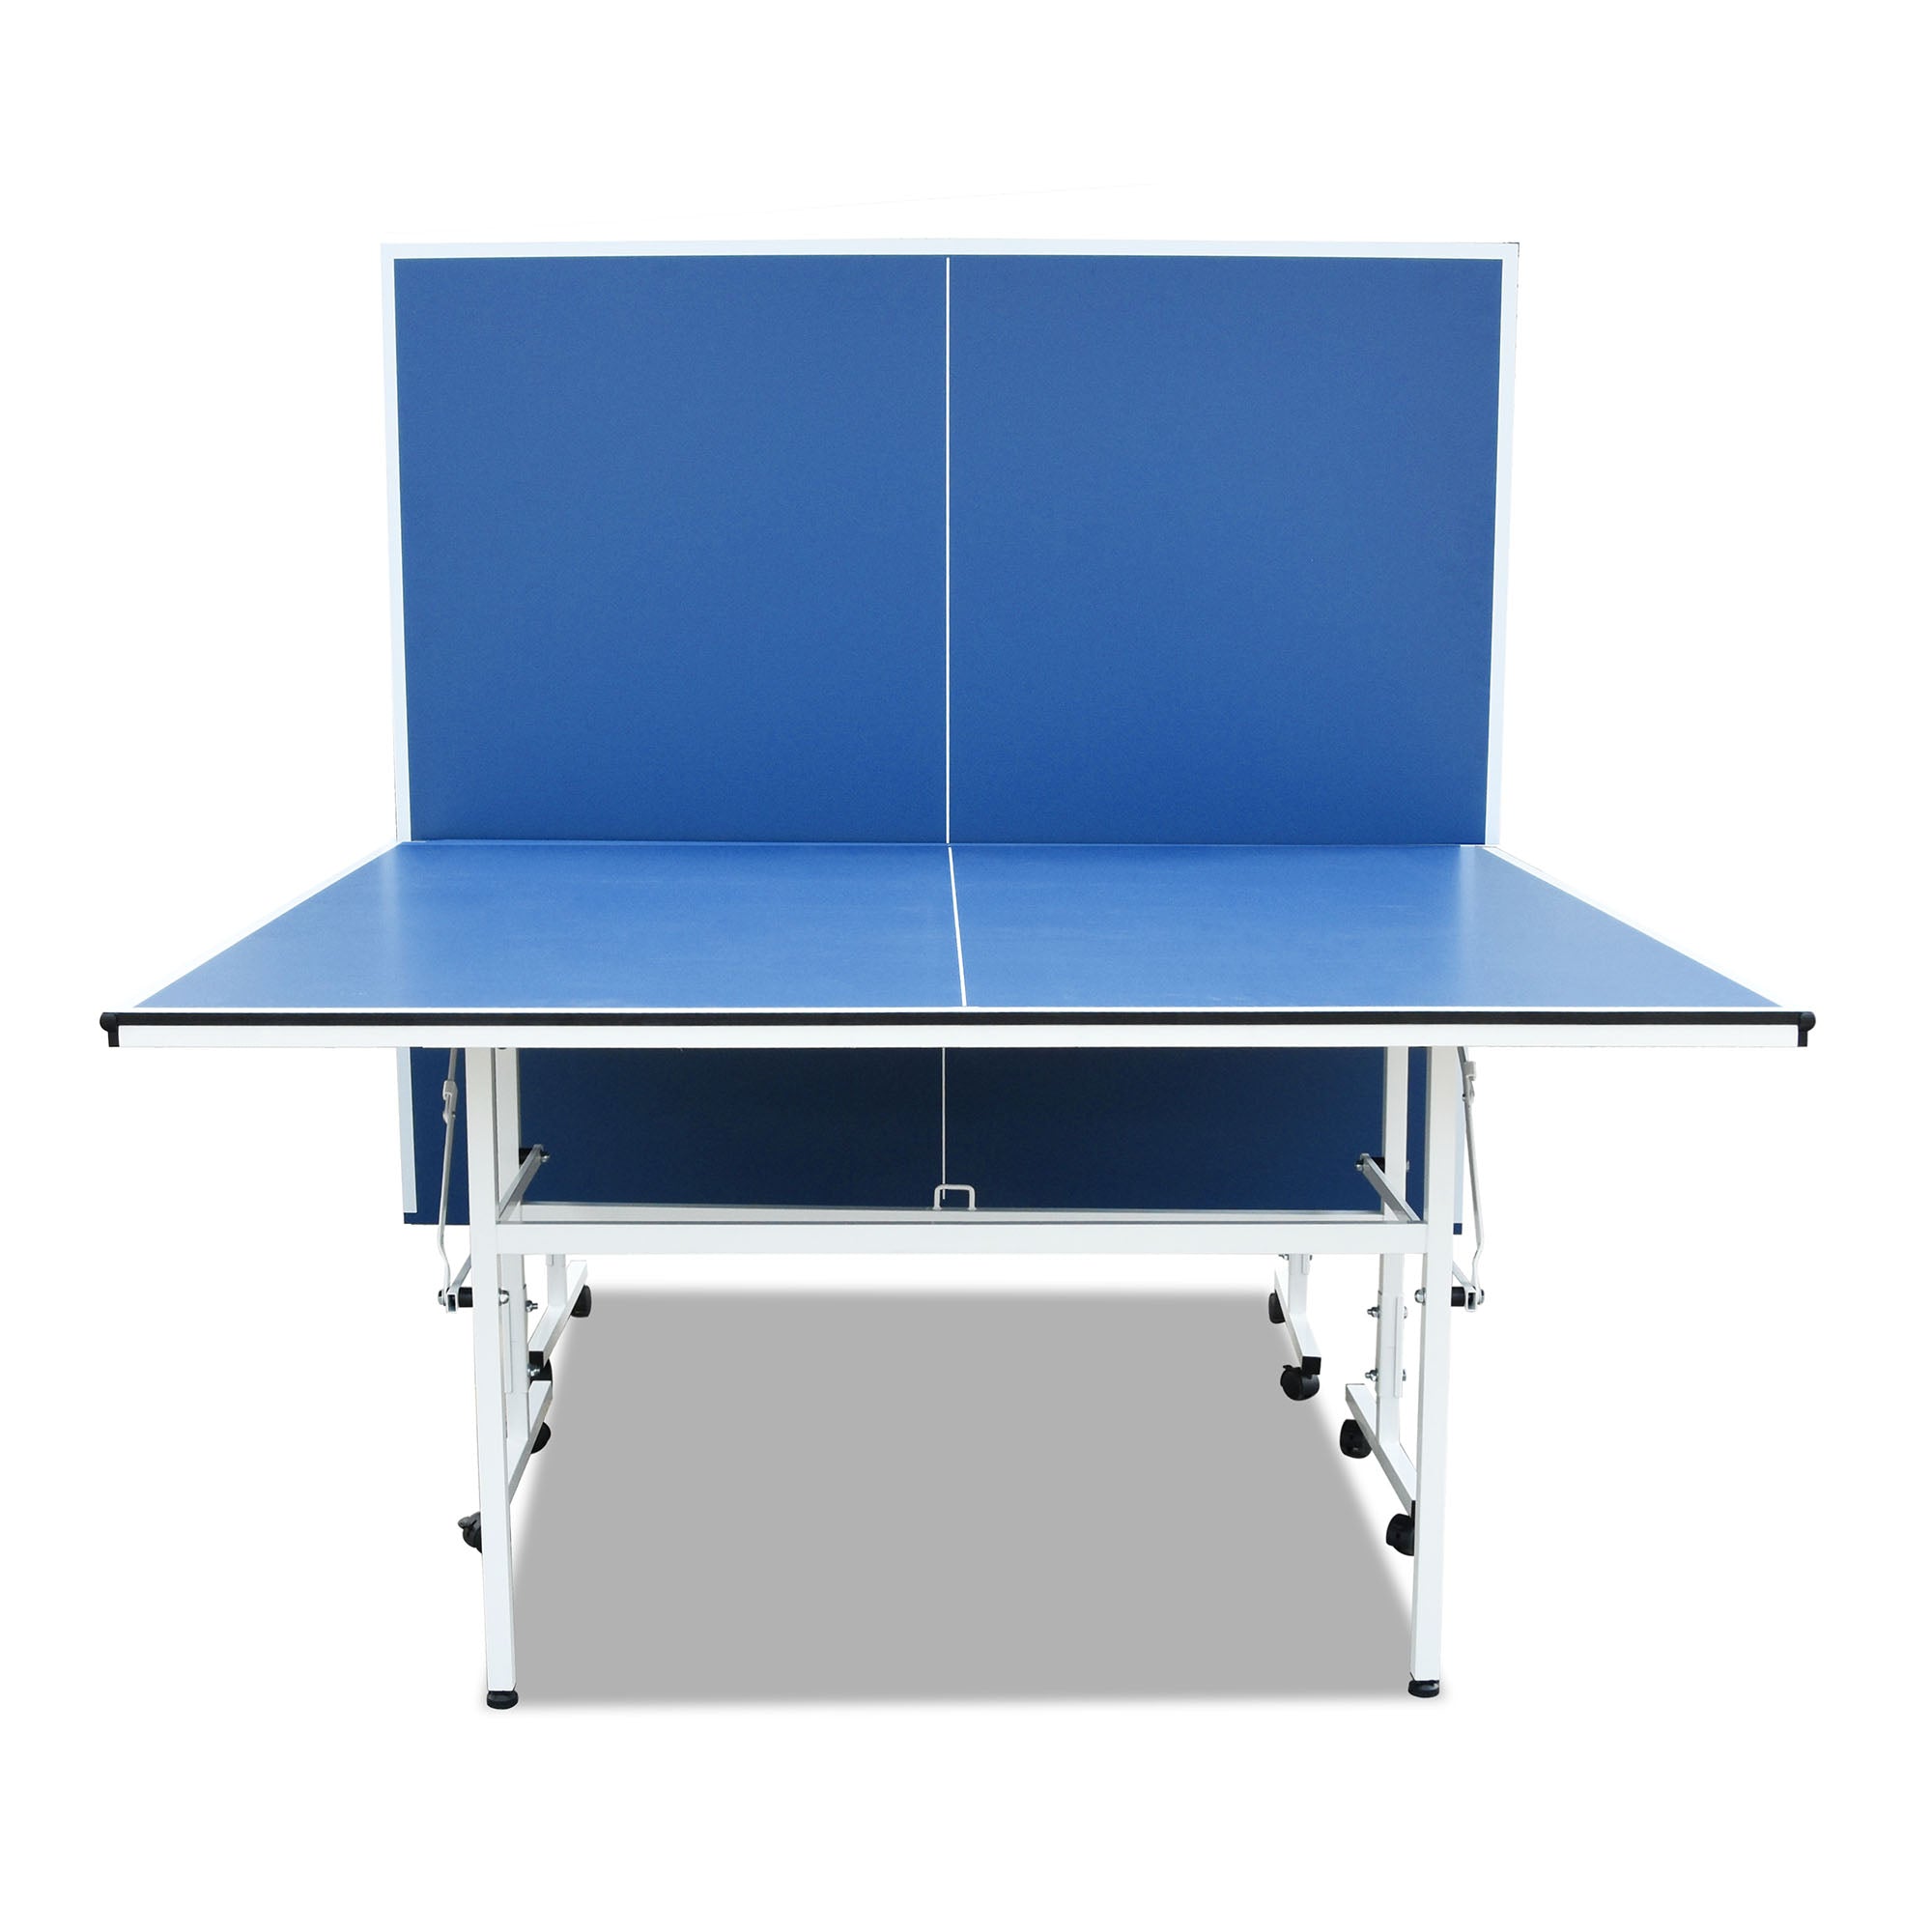 DH 13mm Foldable Portable Ping Pong Table Tennis Table + Accessory Package  - Blue